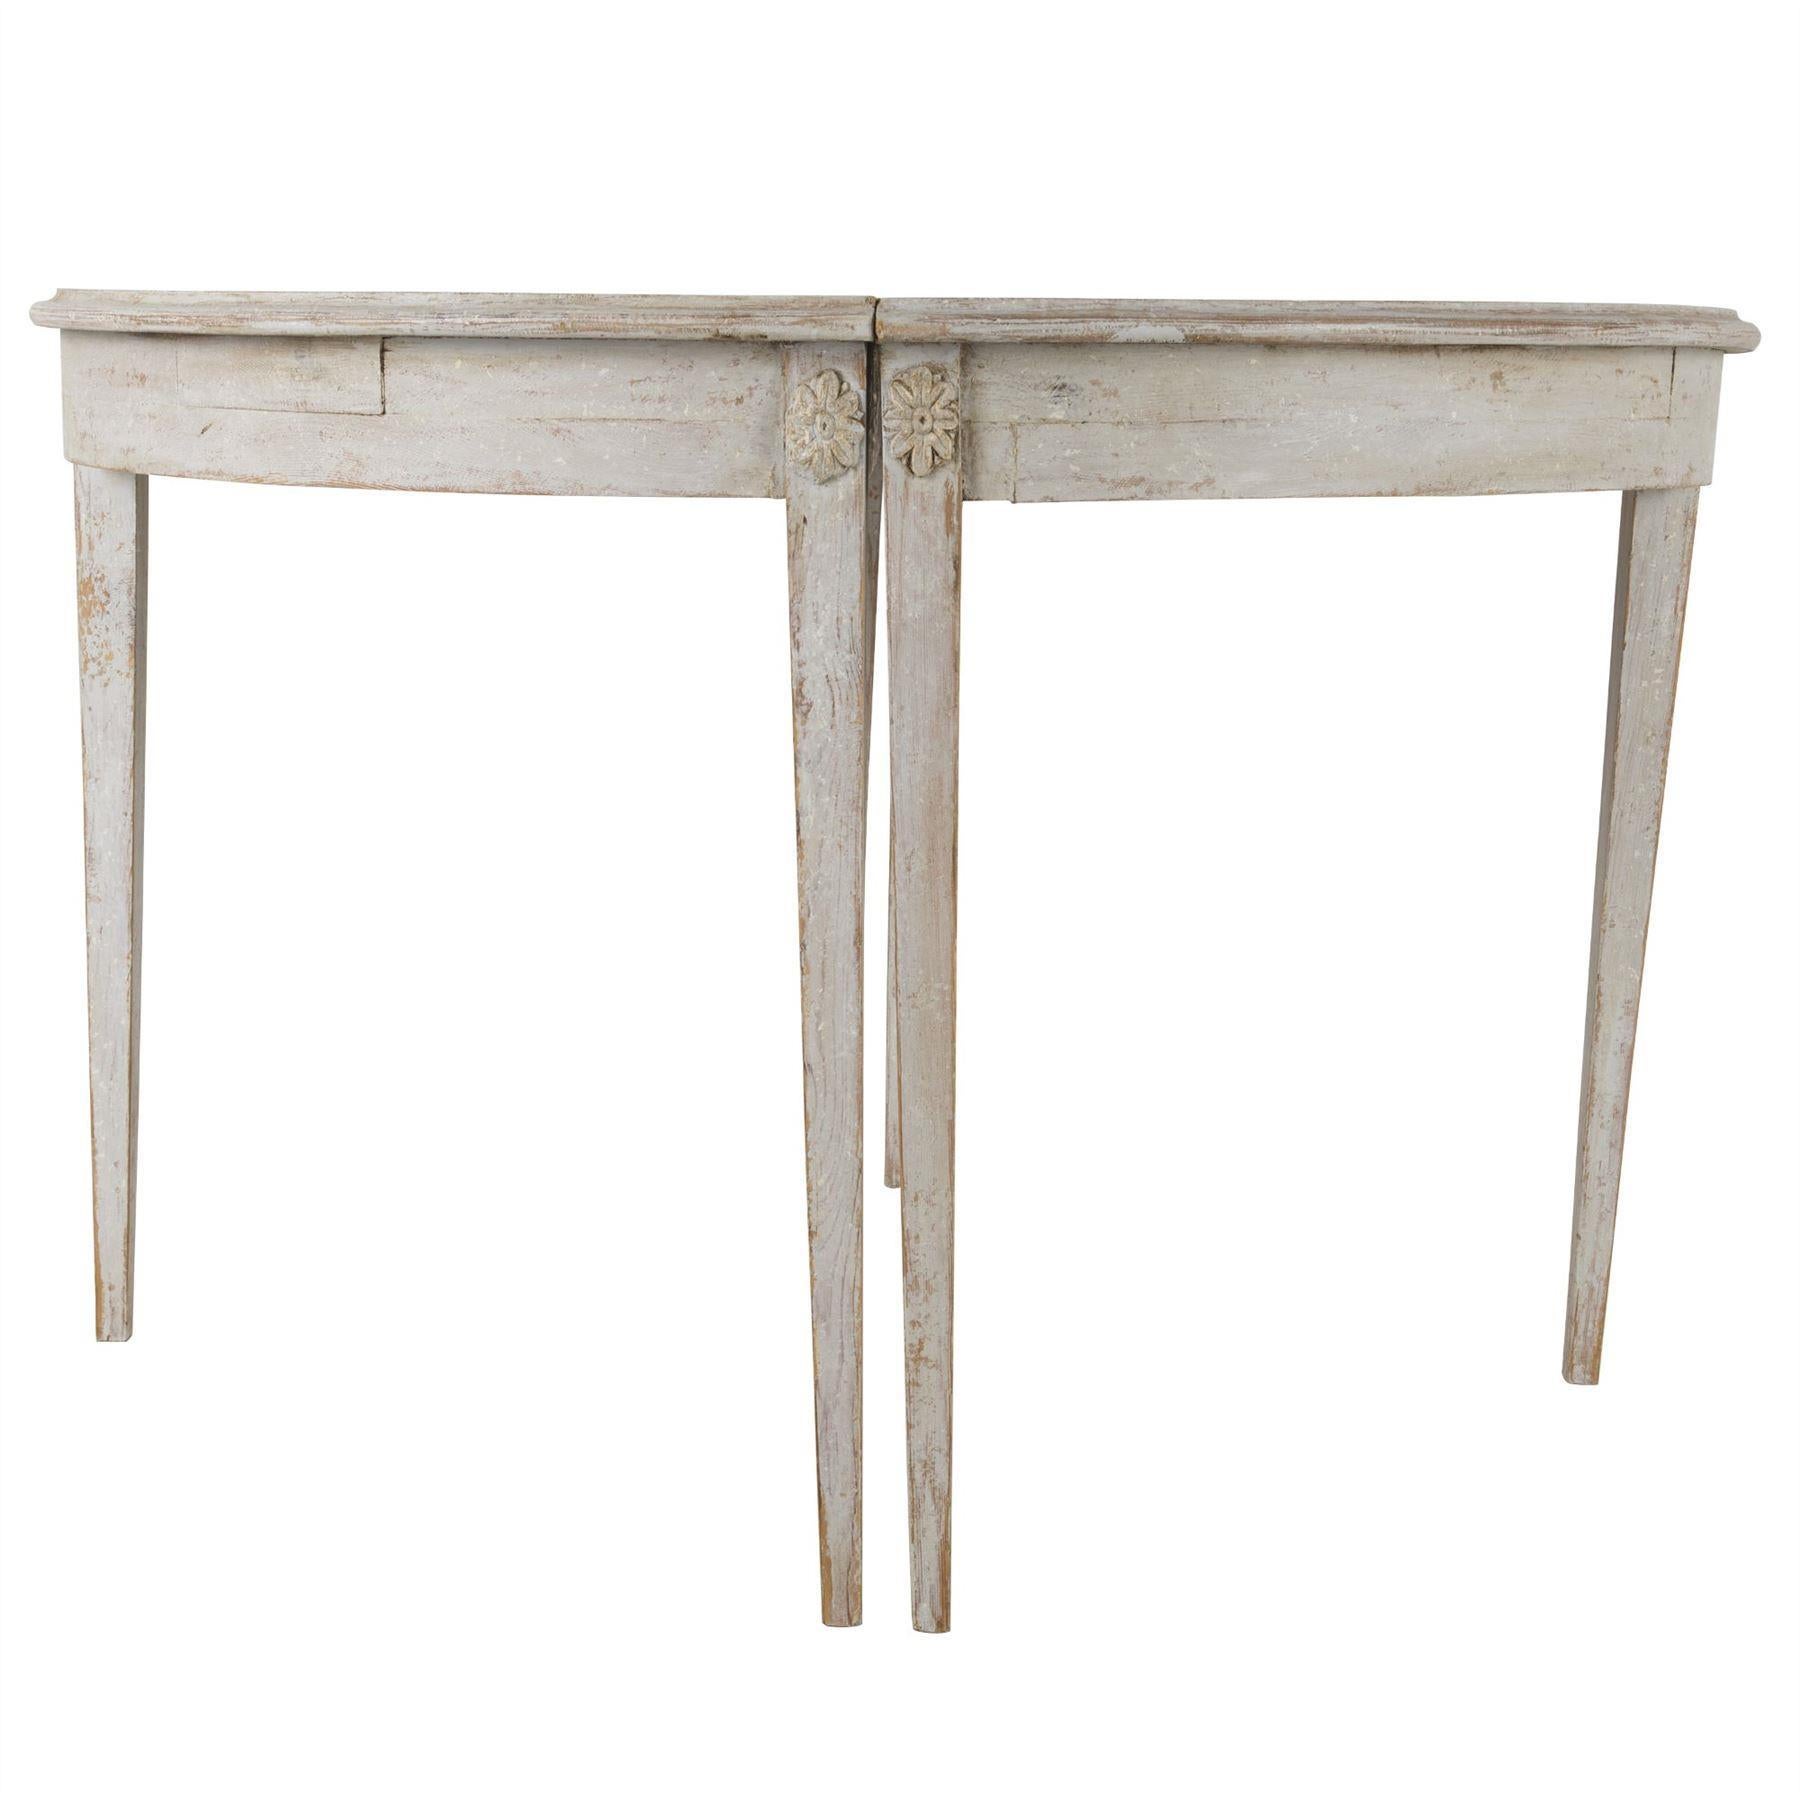 gustavian style dining table